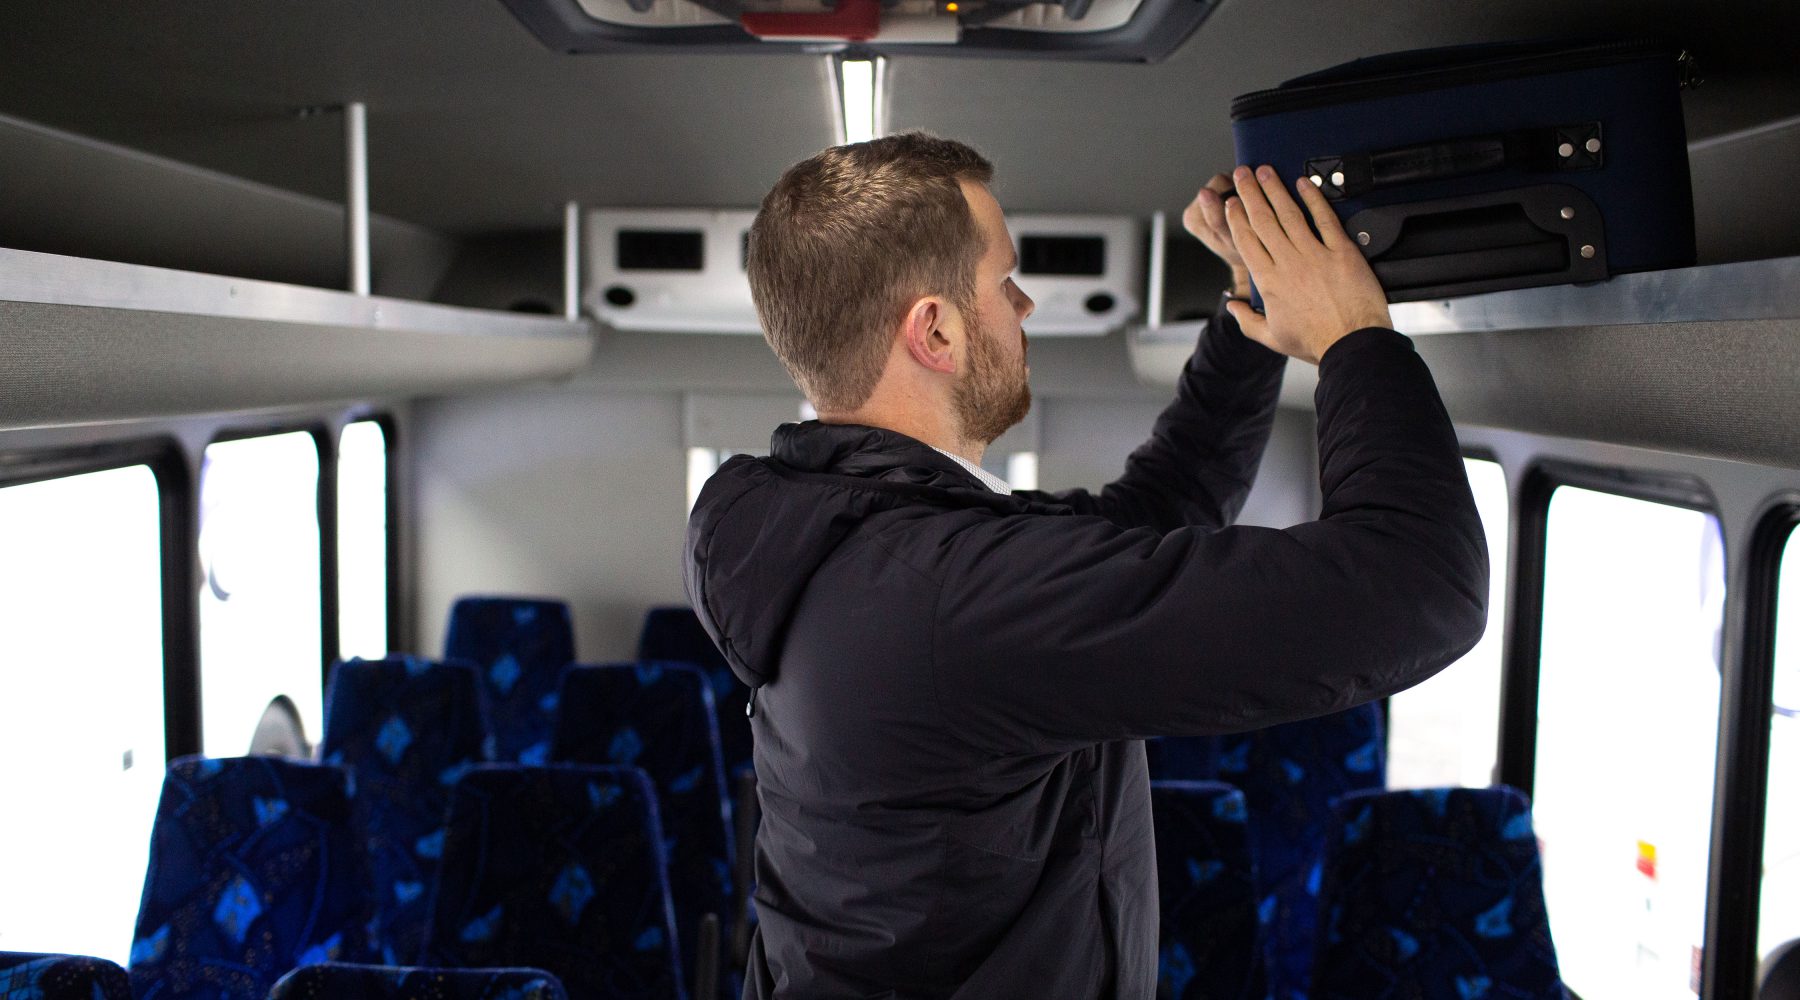 A man puts luggage in storage above a bus seat